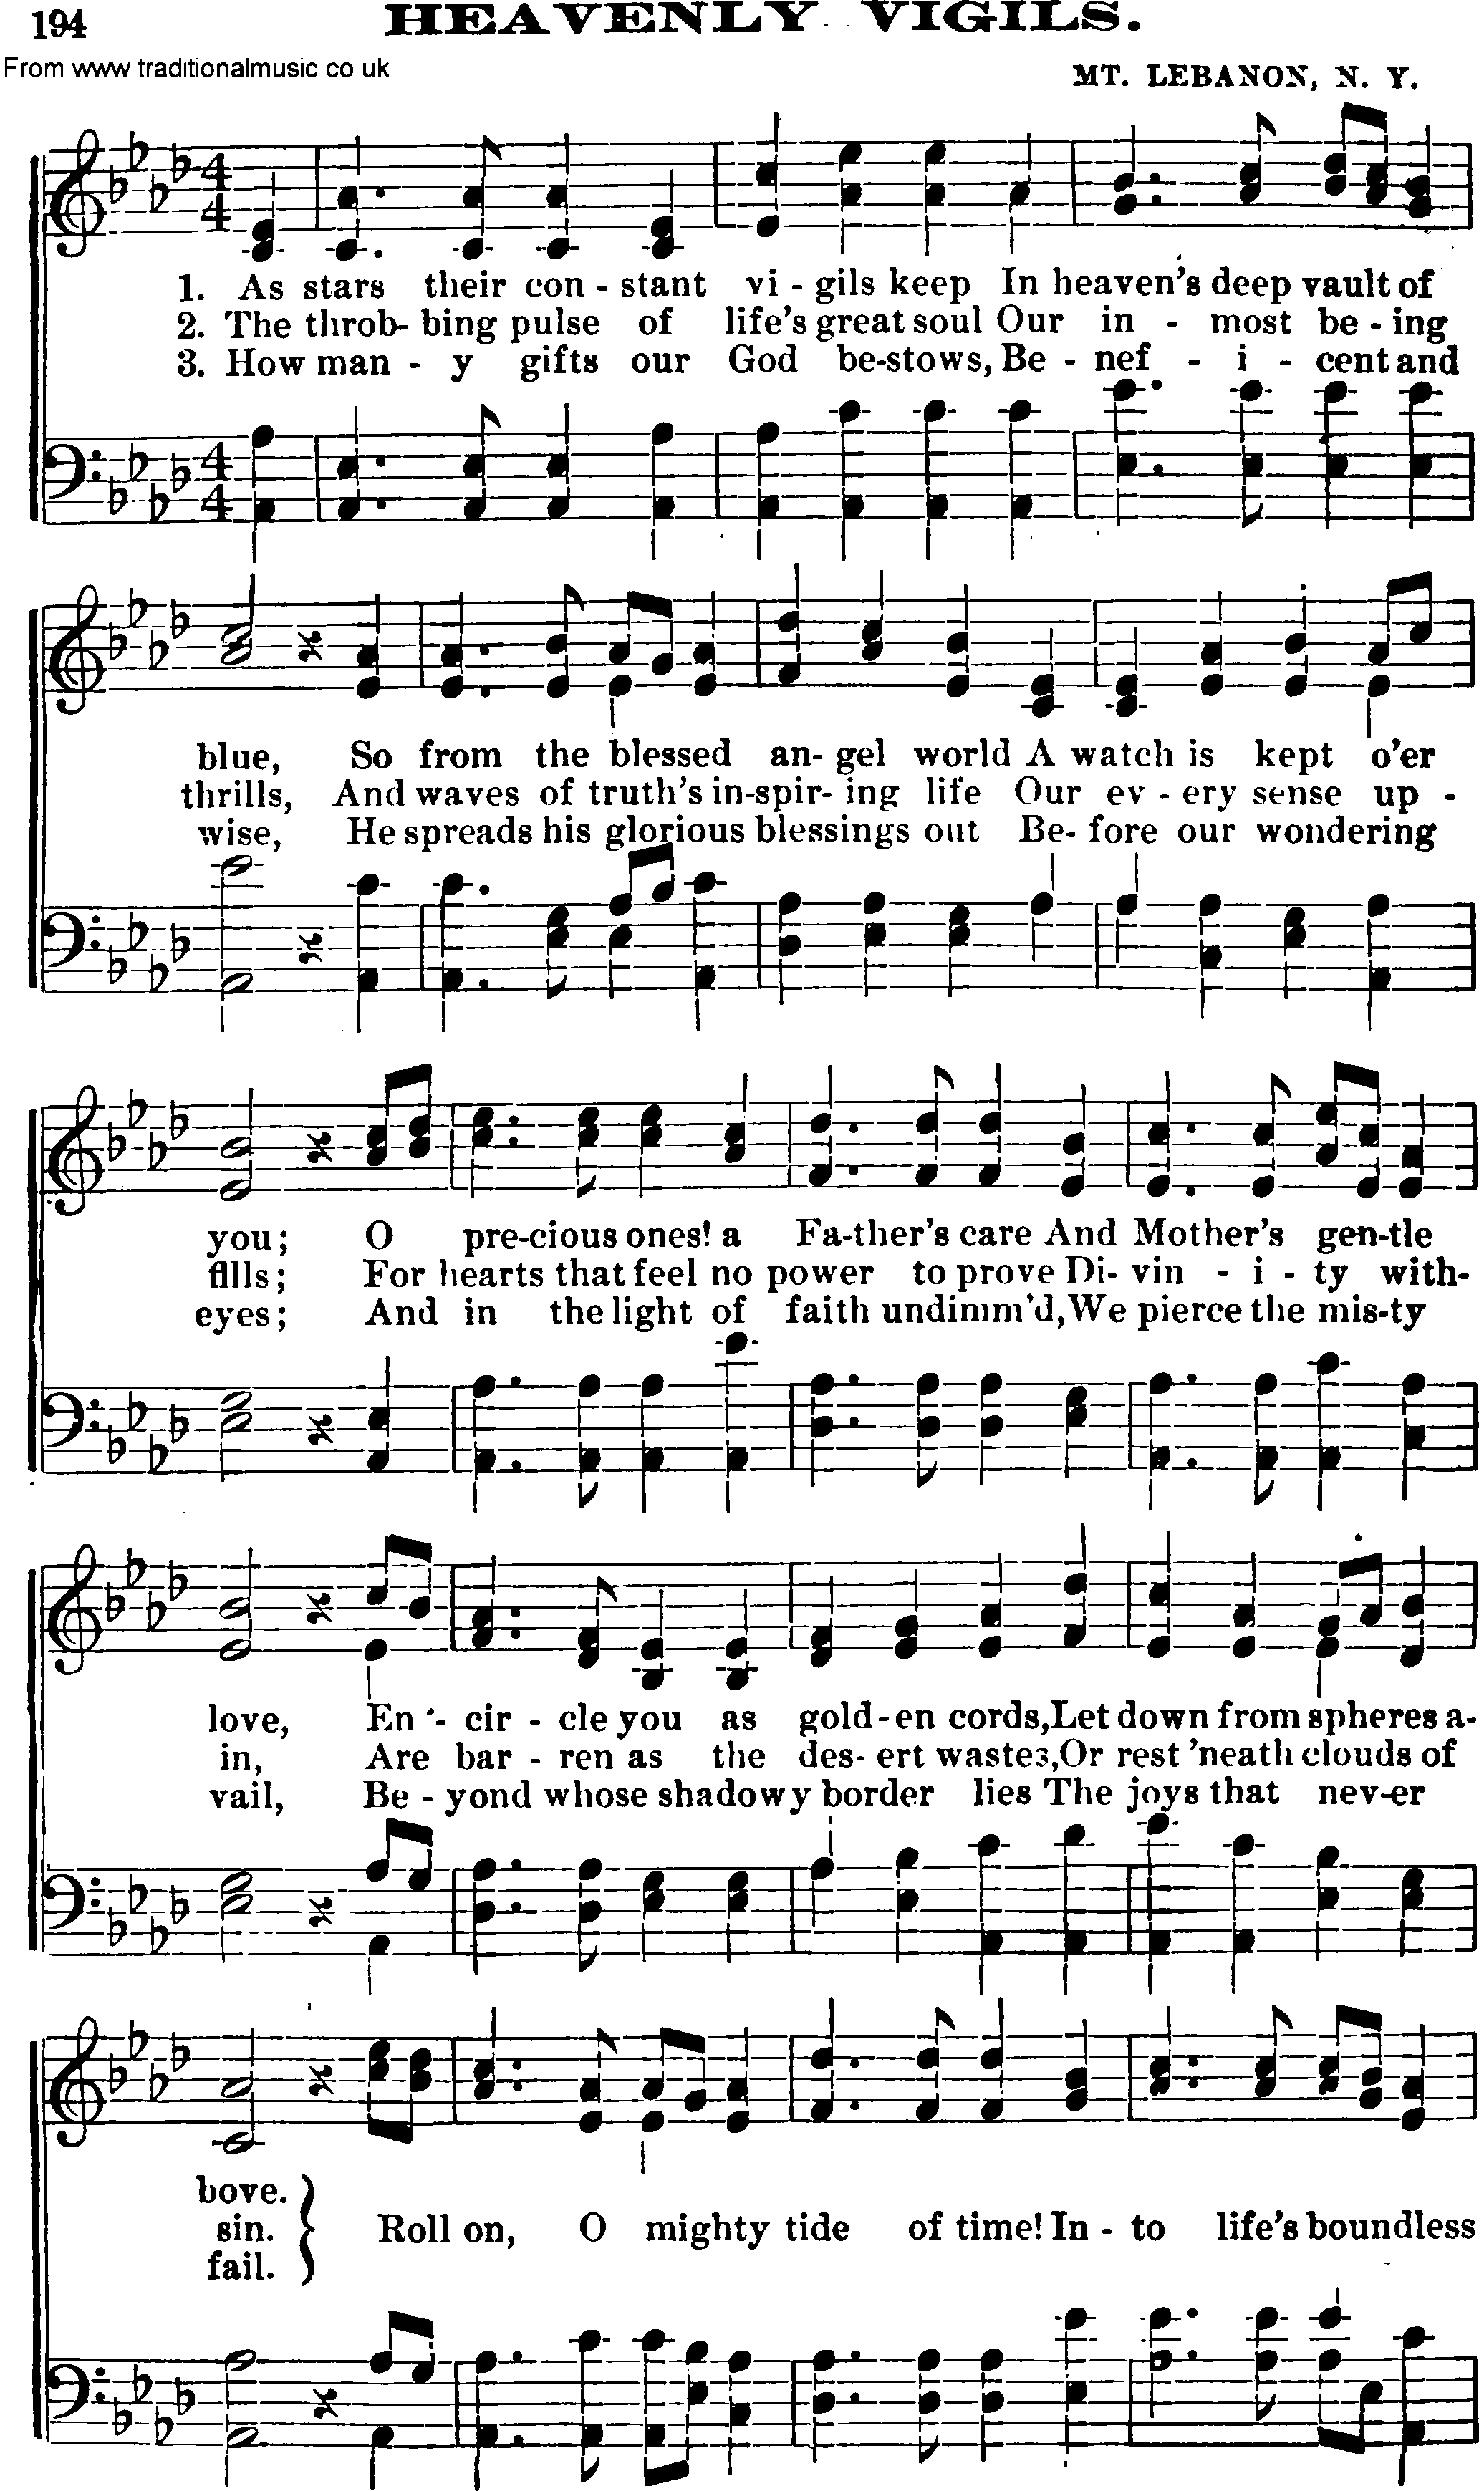 Shaker Music collection, Hymn: Heavenly Vigils, sheetmusic and PDF